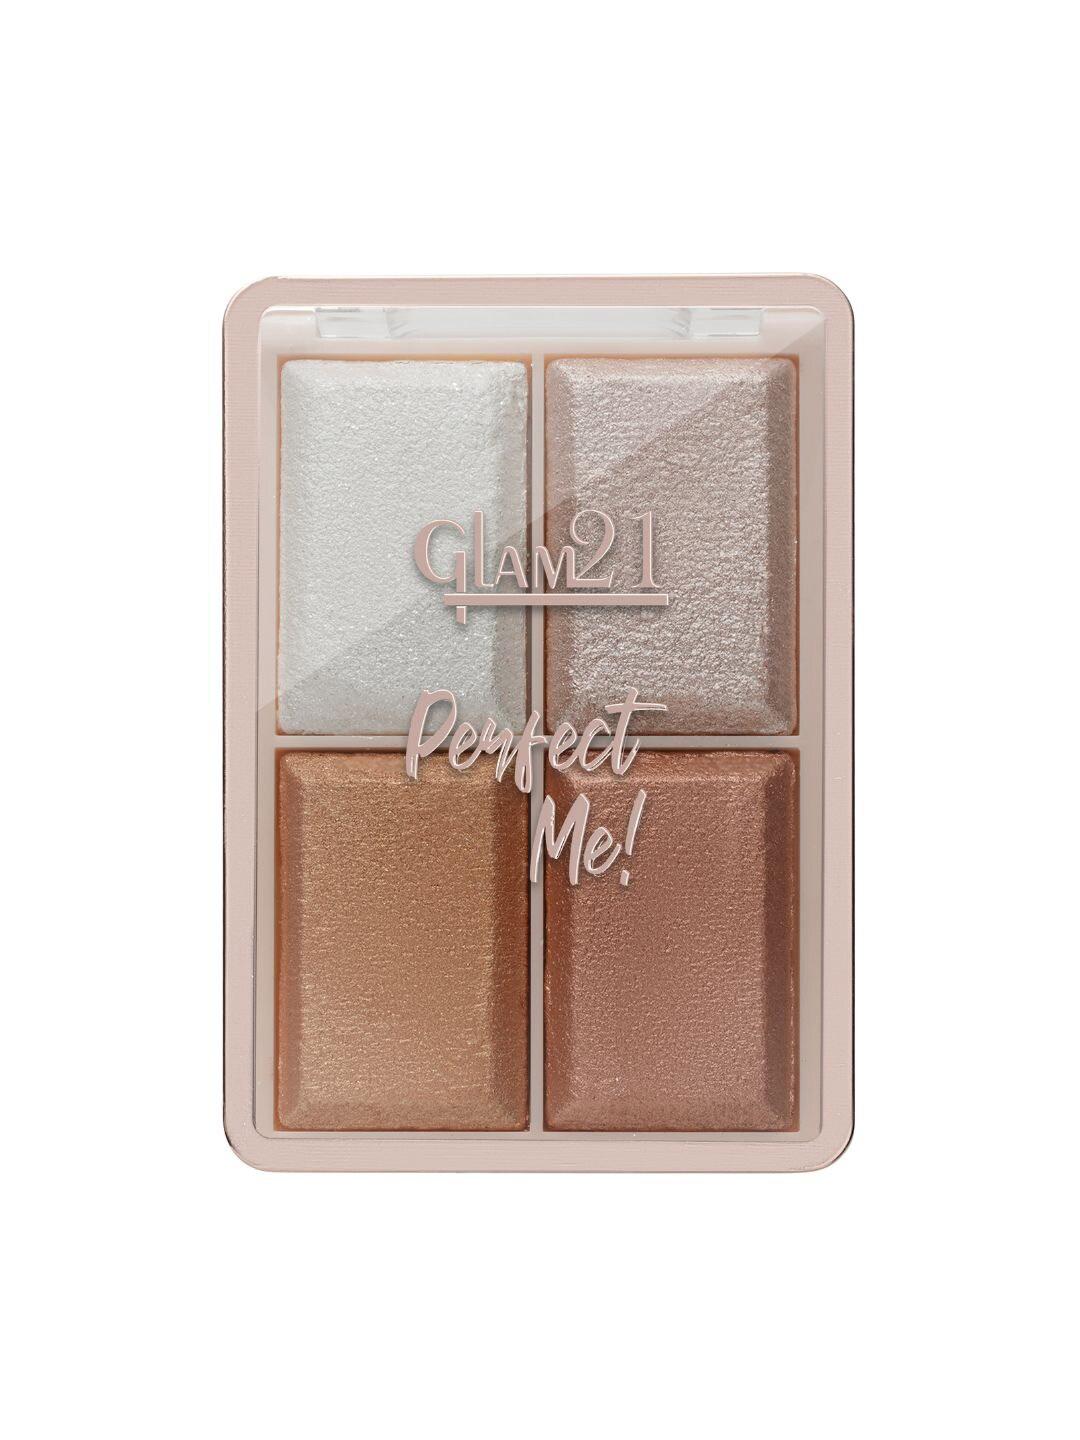 GLAM21 Perfect Me Highlighter Palette Blusher 6 g - Shade 01